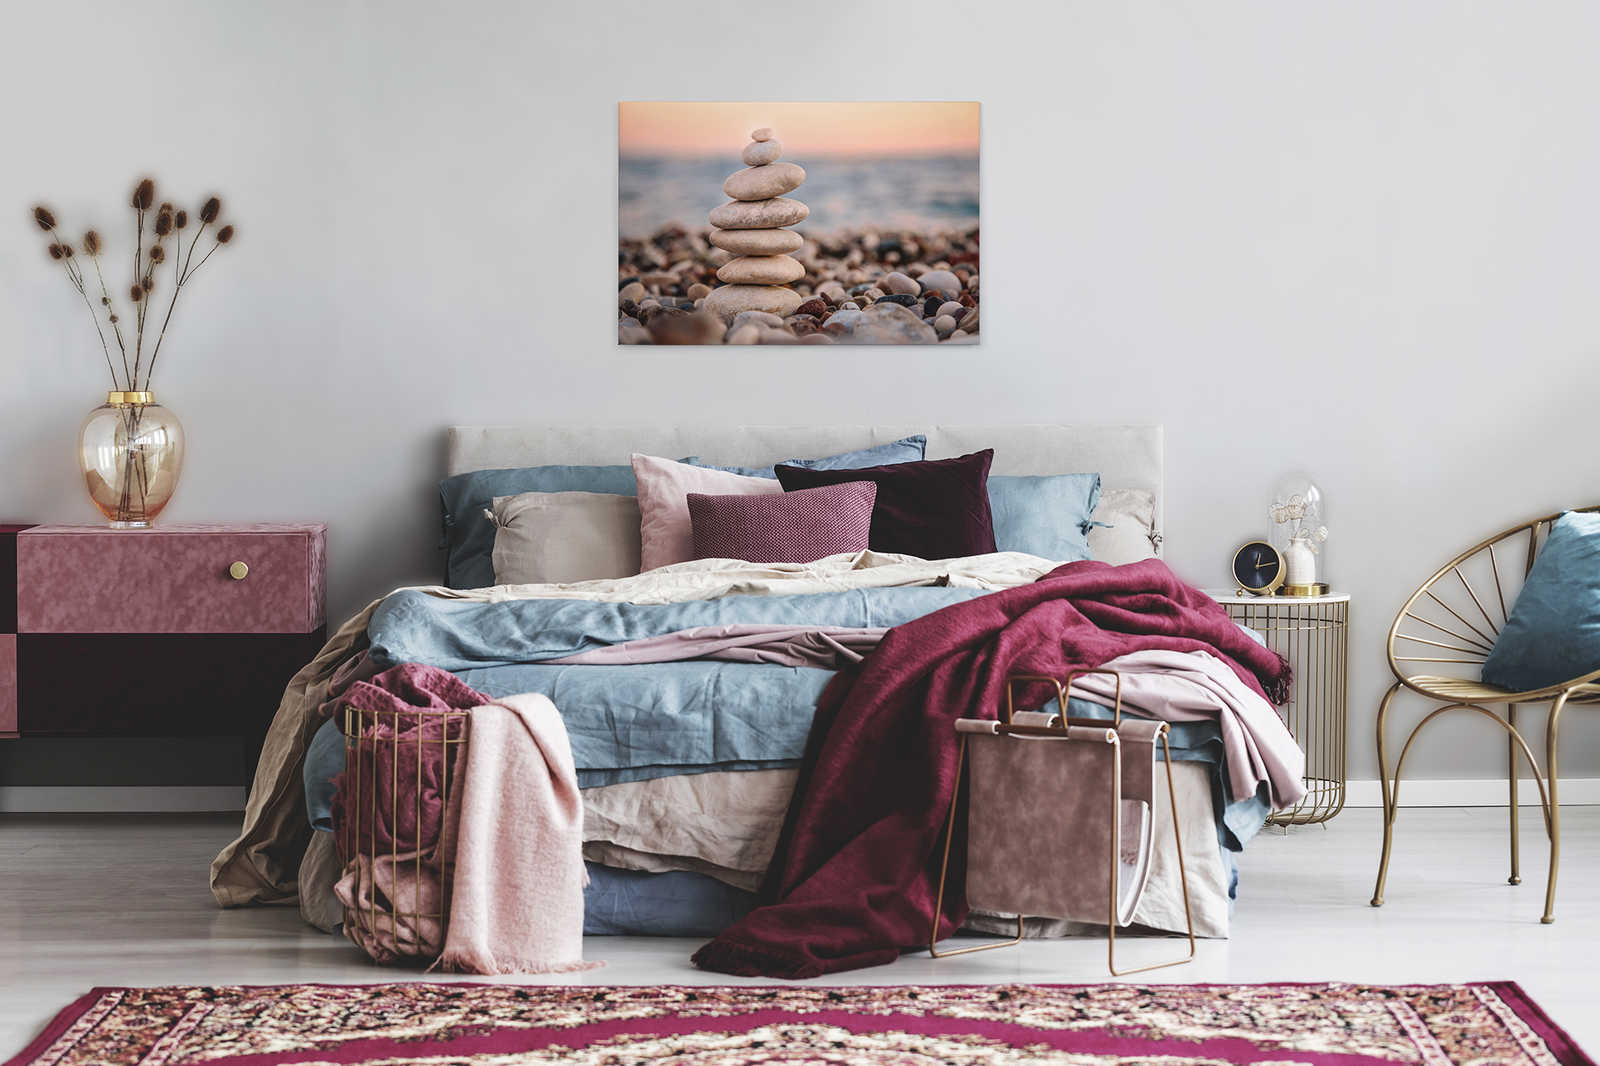             Canvas with stone tower by the sea | grey, blue, orange - 0.90 m x 0.60 m
        